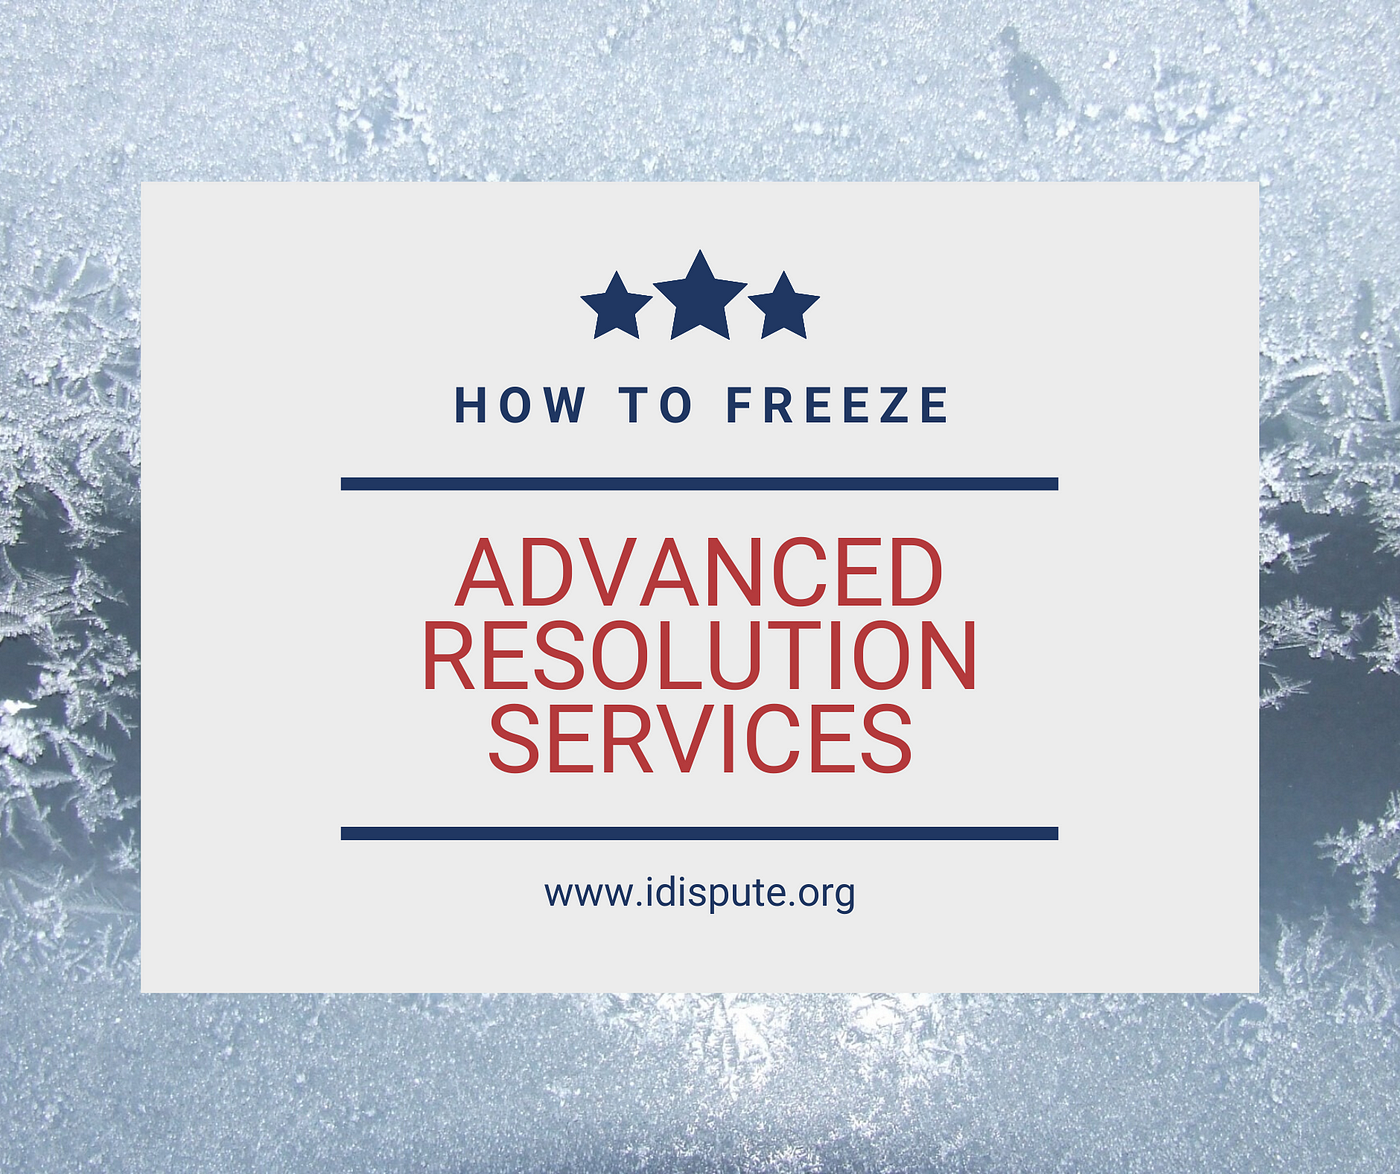 Advanced resolution services security freeze